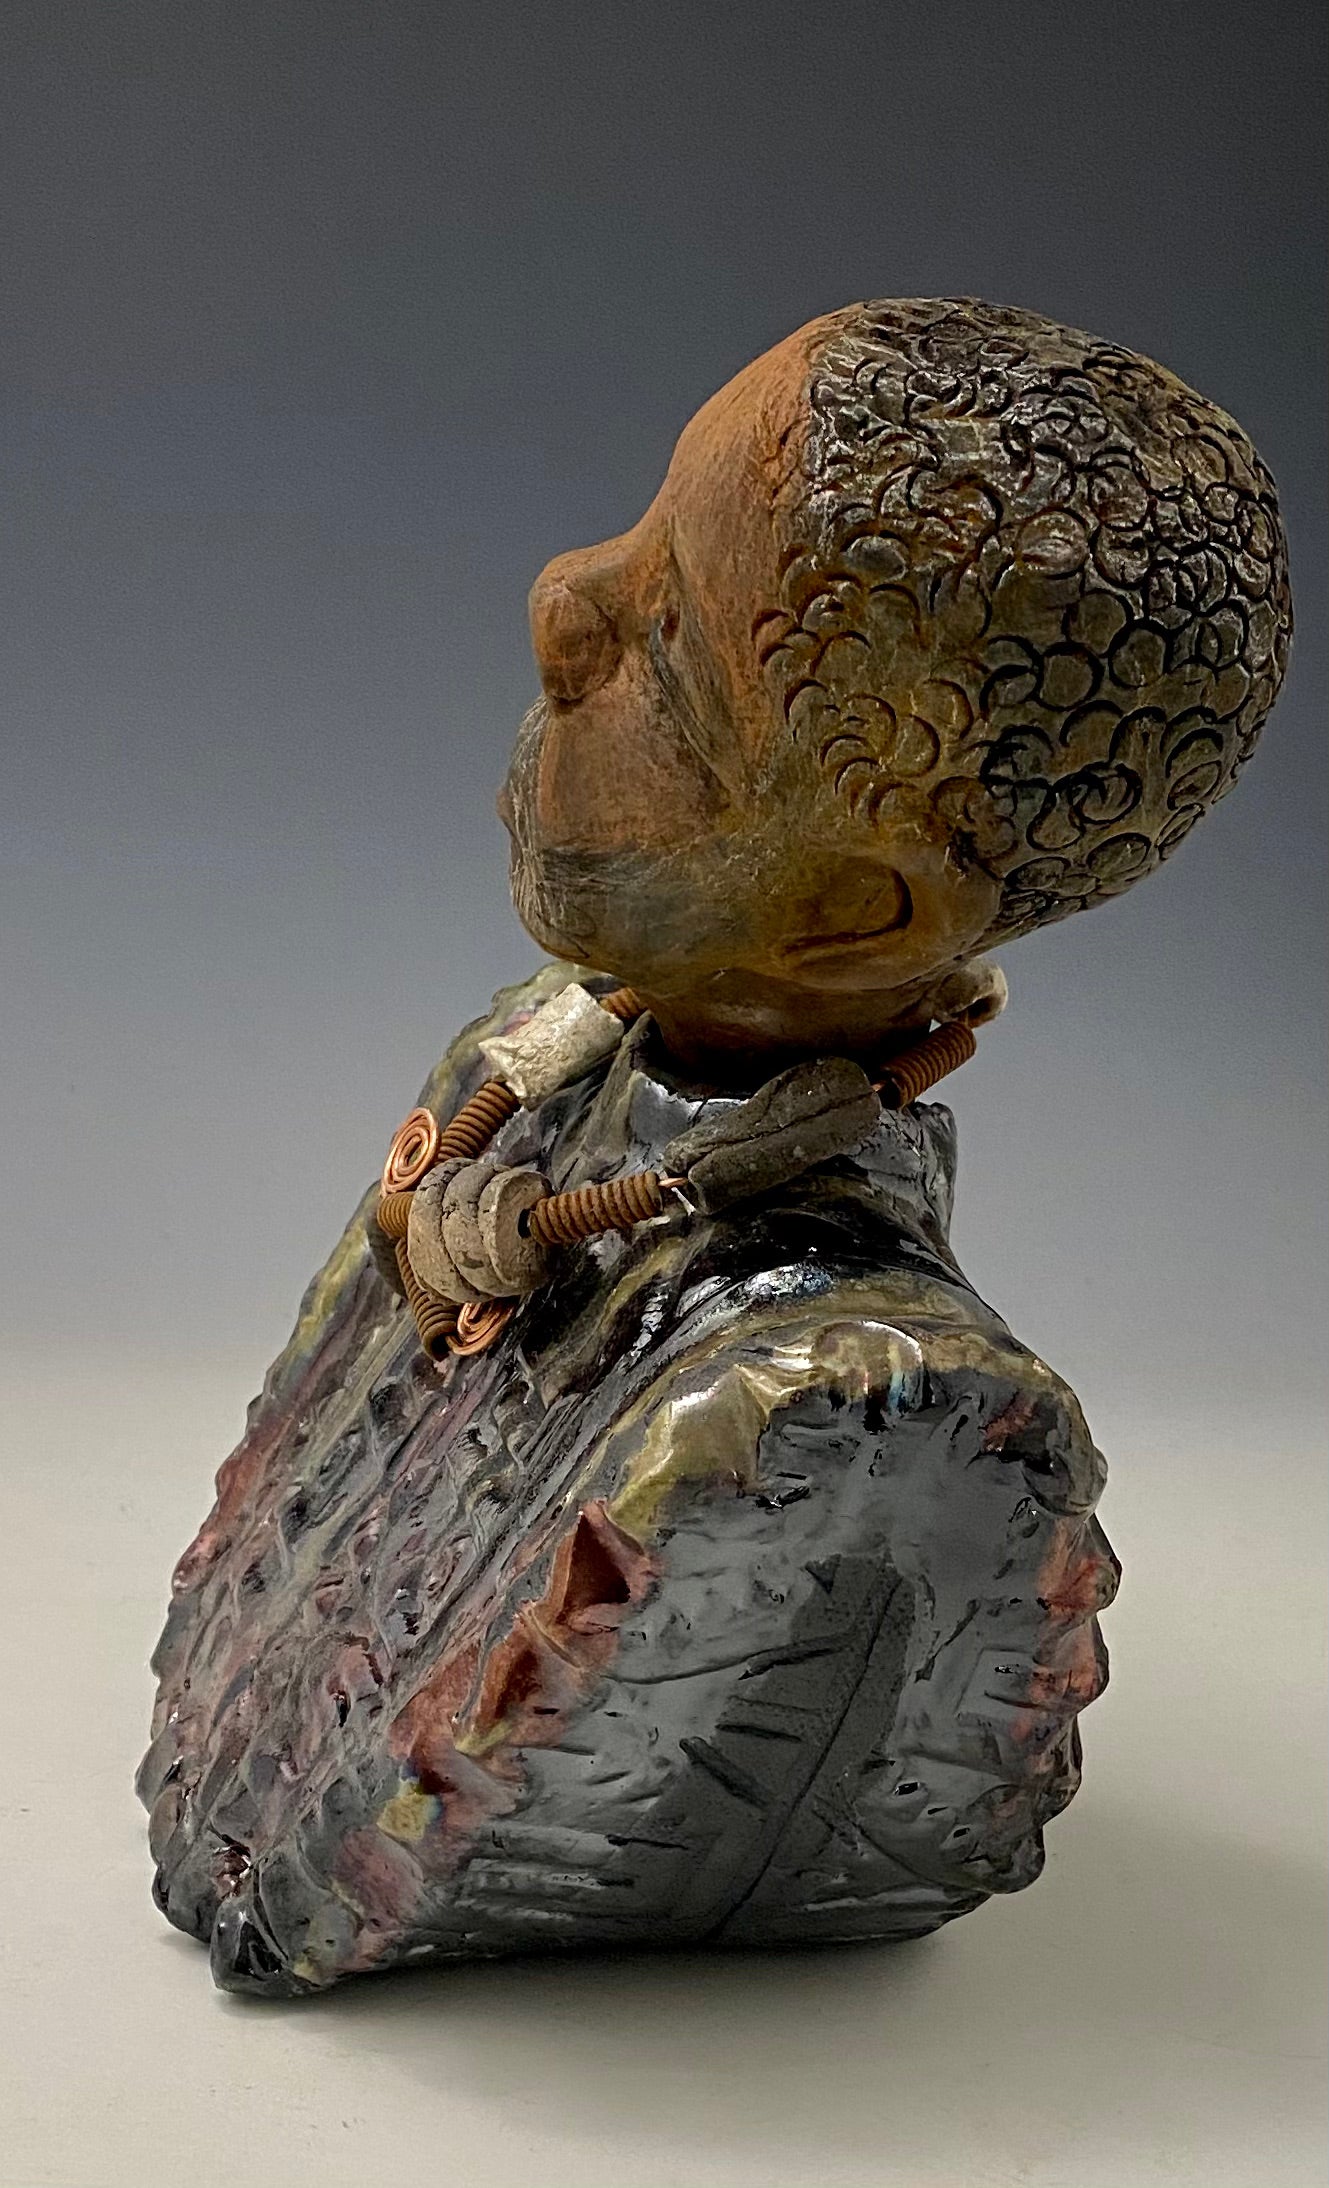 Meet James! James stands 10" x 7" x 5.5" and weighs 3.5lbs. James wears a colorful metallic gold, blue and copper dashiki. He is bald and bearded and partially grey. Yes ,,,,,,He is one of few Men found in the Herdew collection!